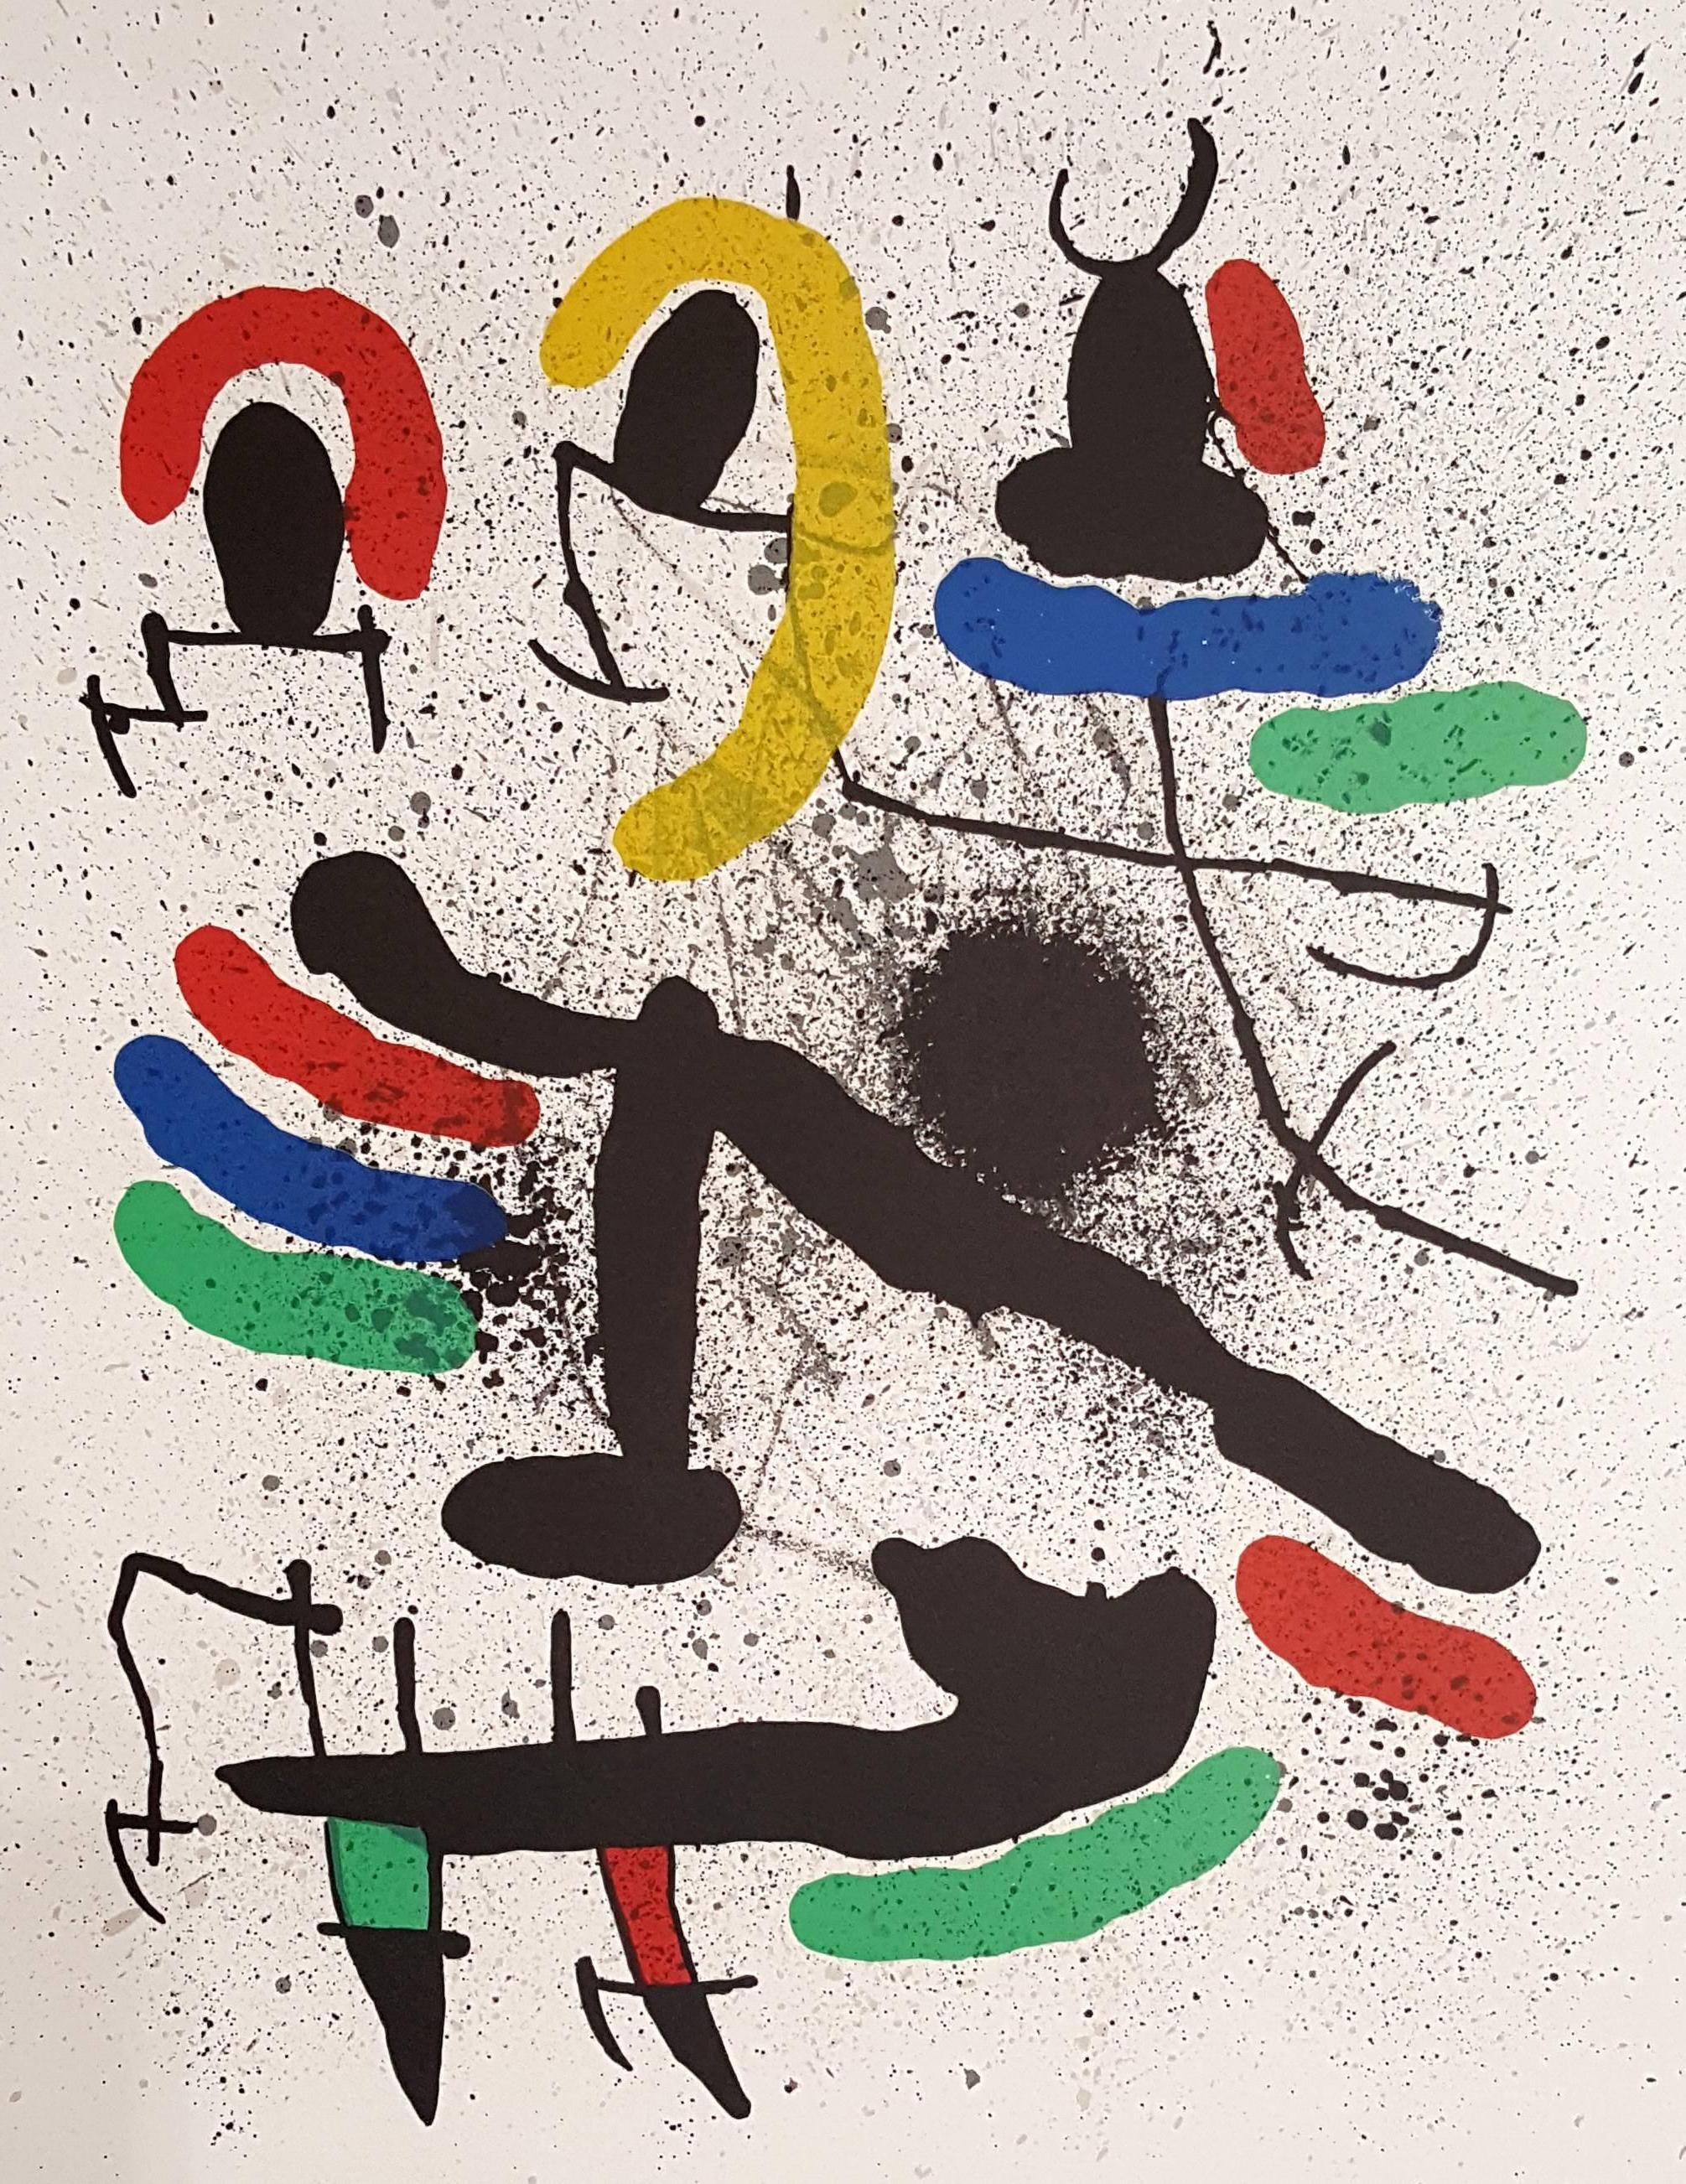 Liberty of Liberties - Original Lithograph Handsigned and Numbered - Abstract Print by Joan Miró